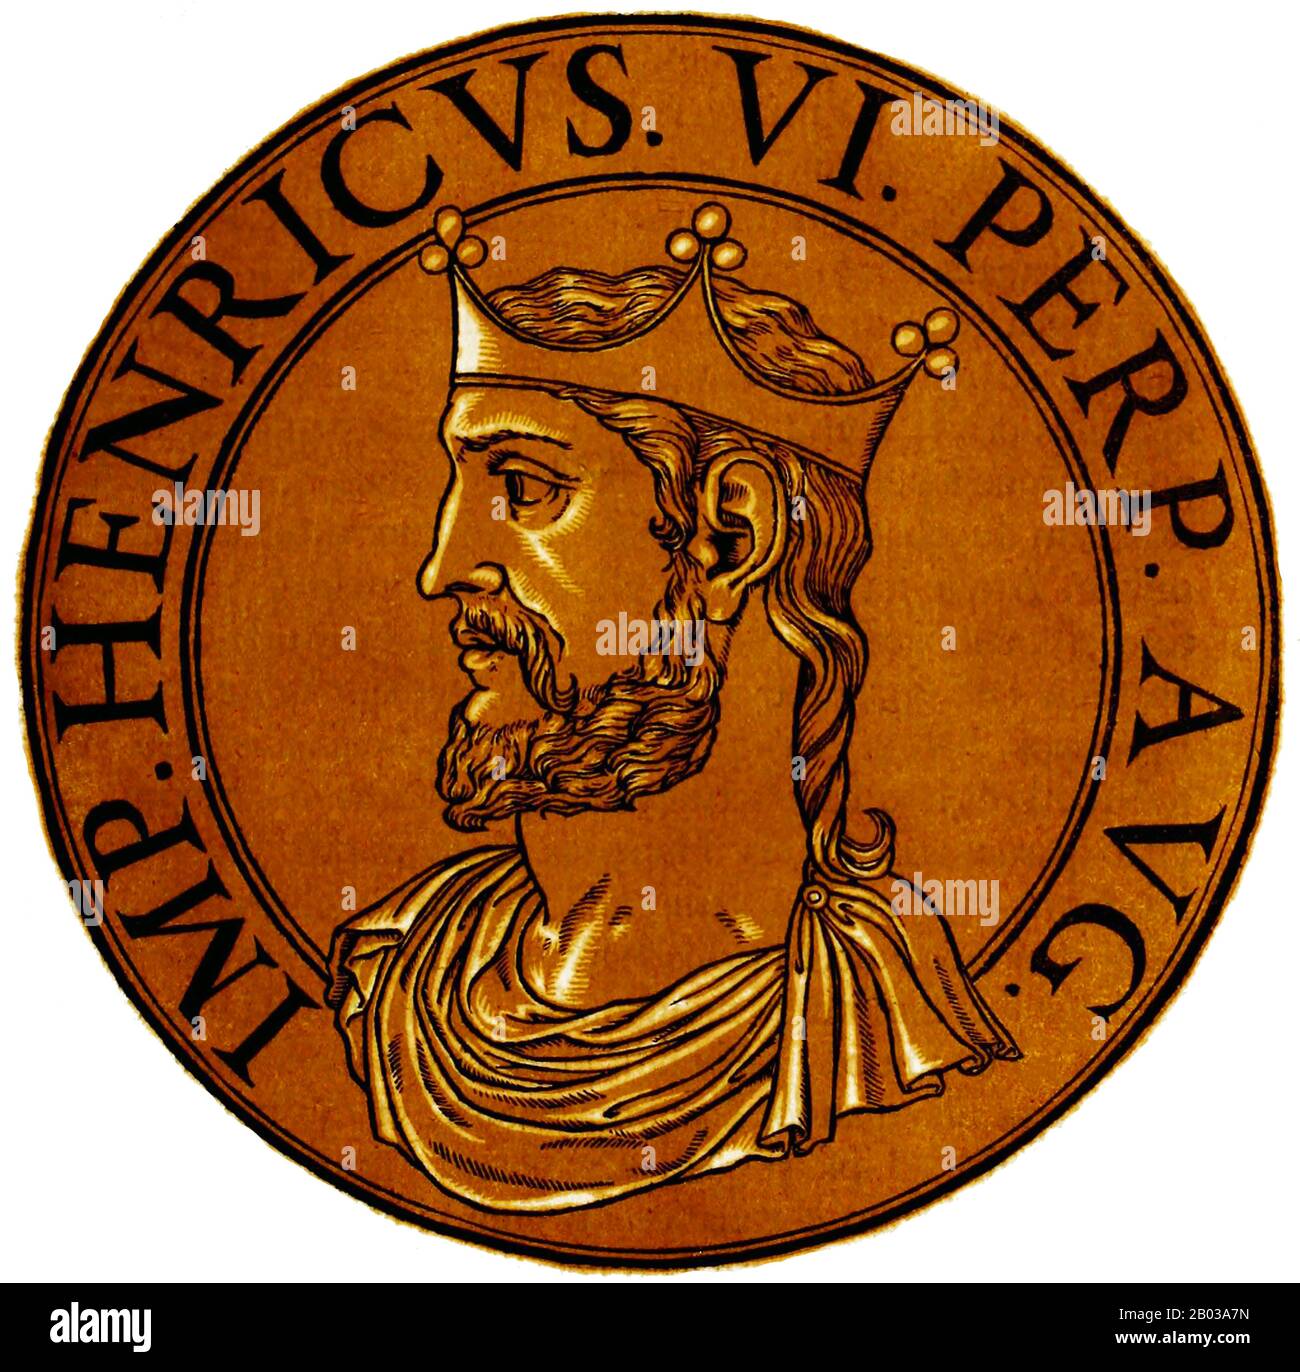 Henry VI (1165-1197) was the second son of Emperor Frederick I, and married the daughter of the late Norman king Roger II of Sicily, Constance of Sicily, in 1186. When his father died in 1190, he became King of Germany and Holy Roman Emperor in 1191. Stock Photo